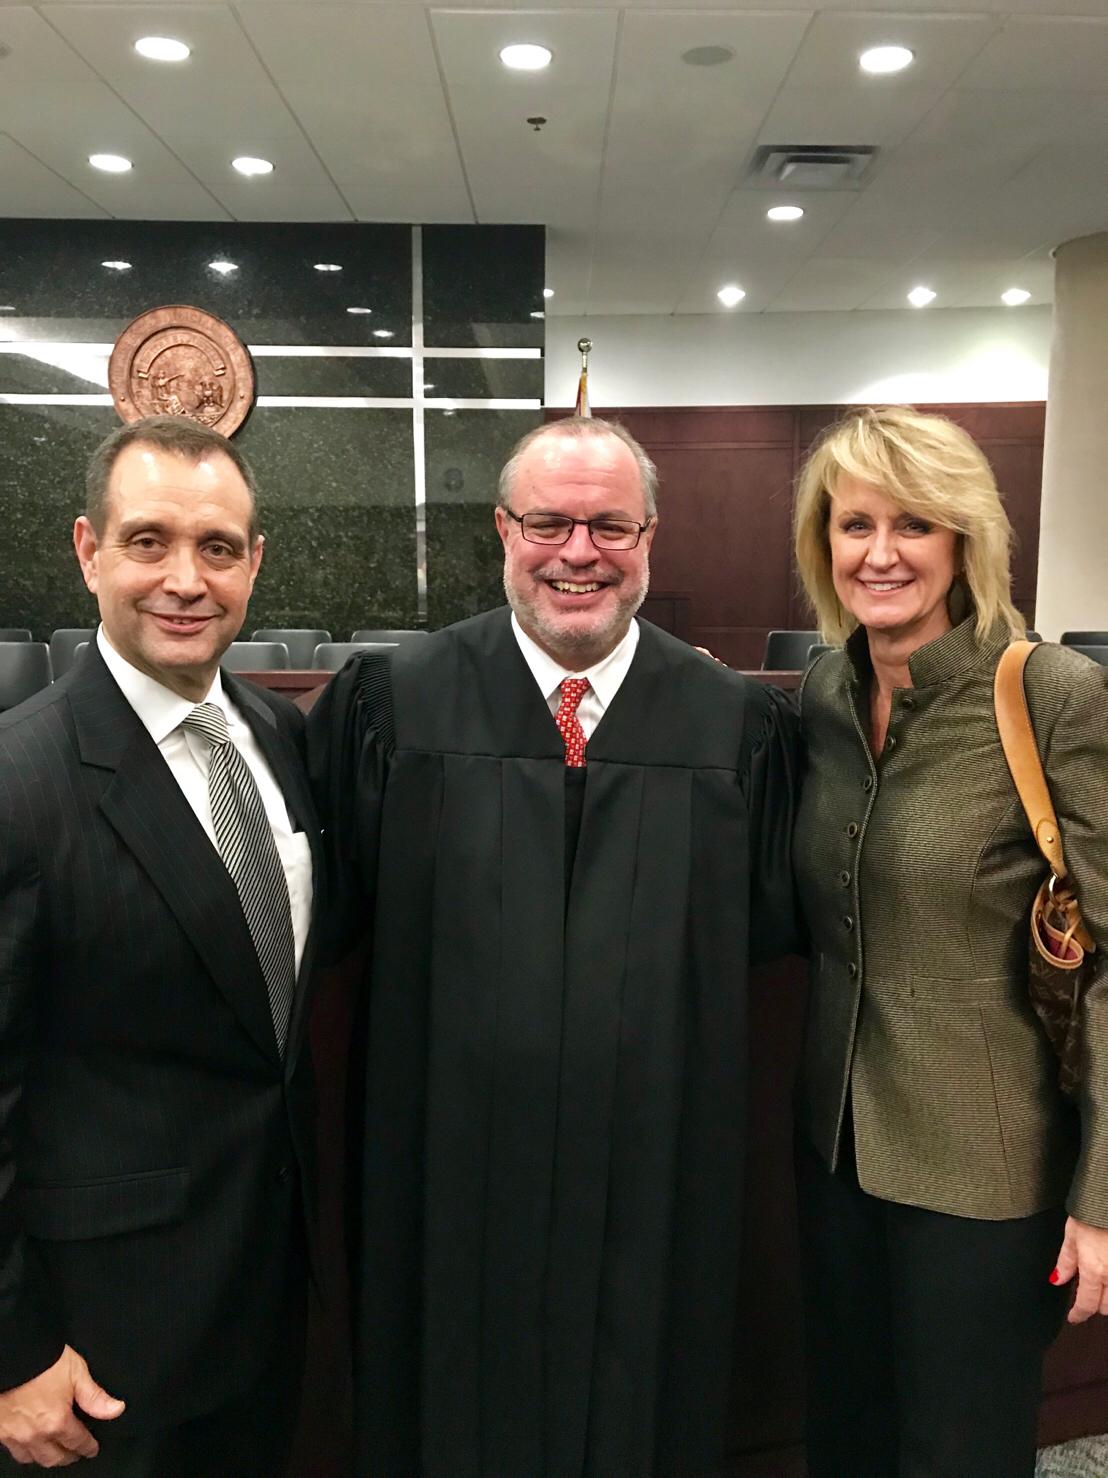 Andrew Diaz and Lorena Ludovici Attend Judge Gutman’s Investiture